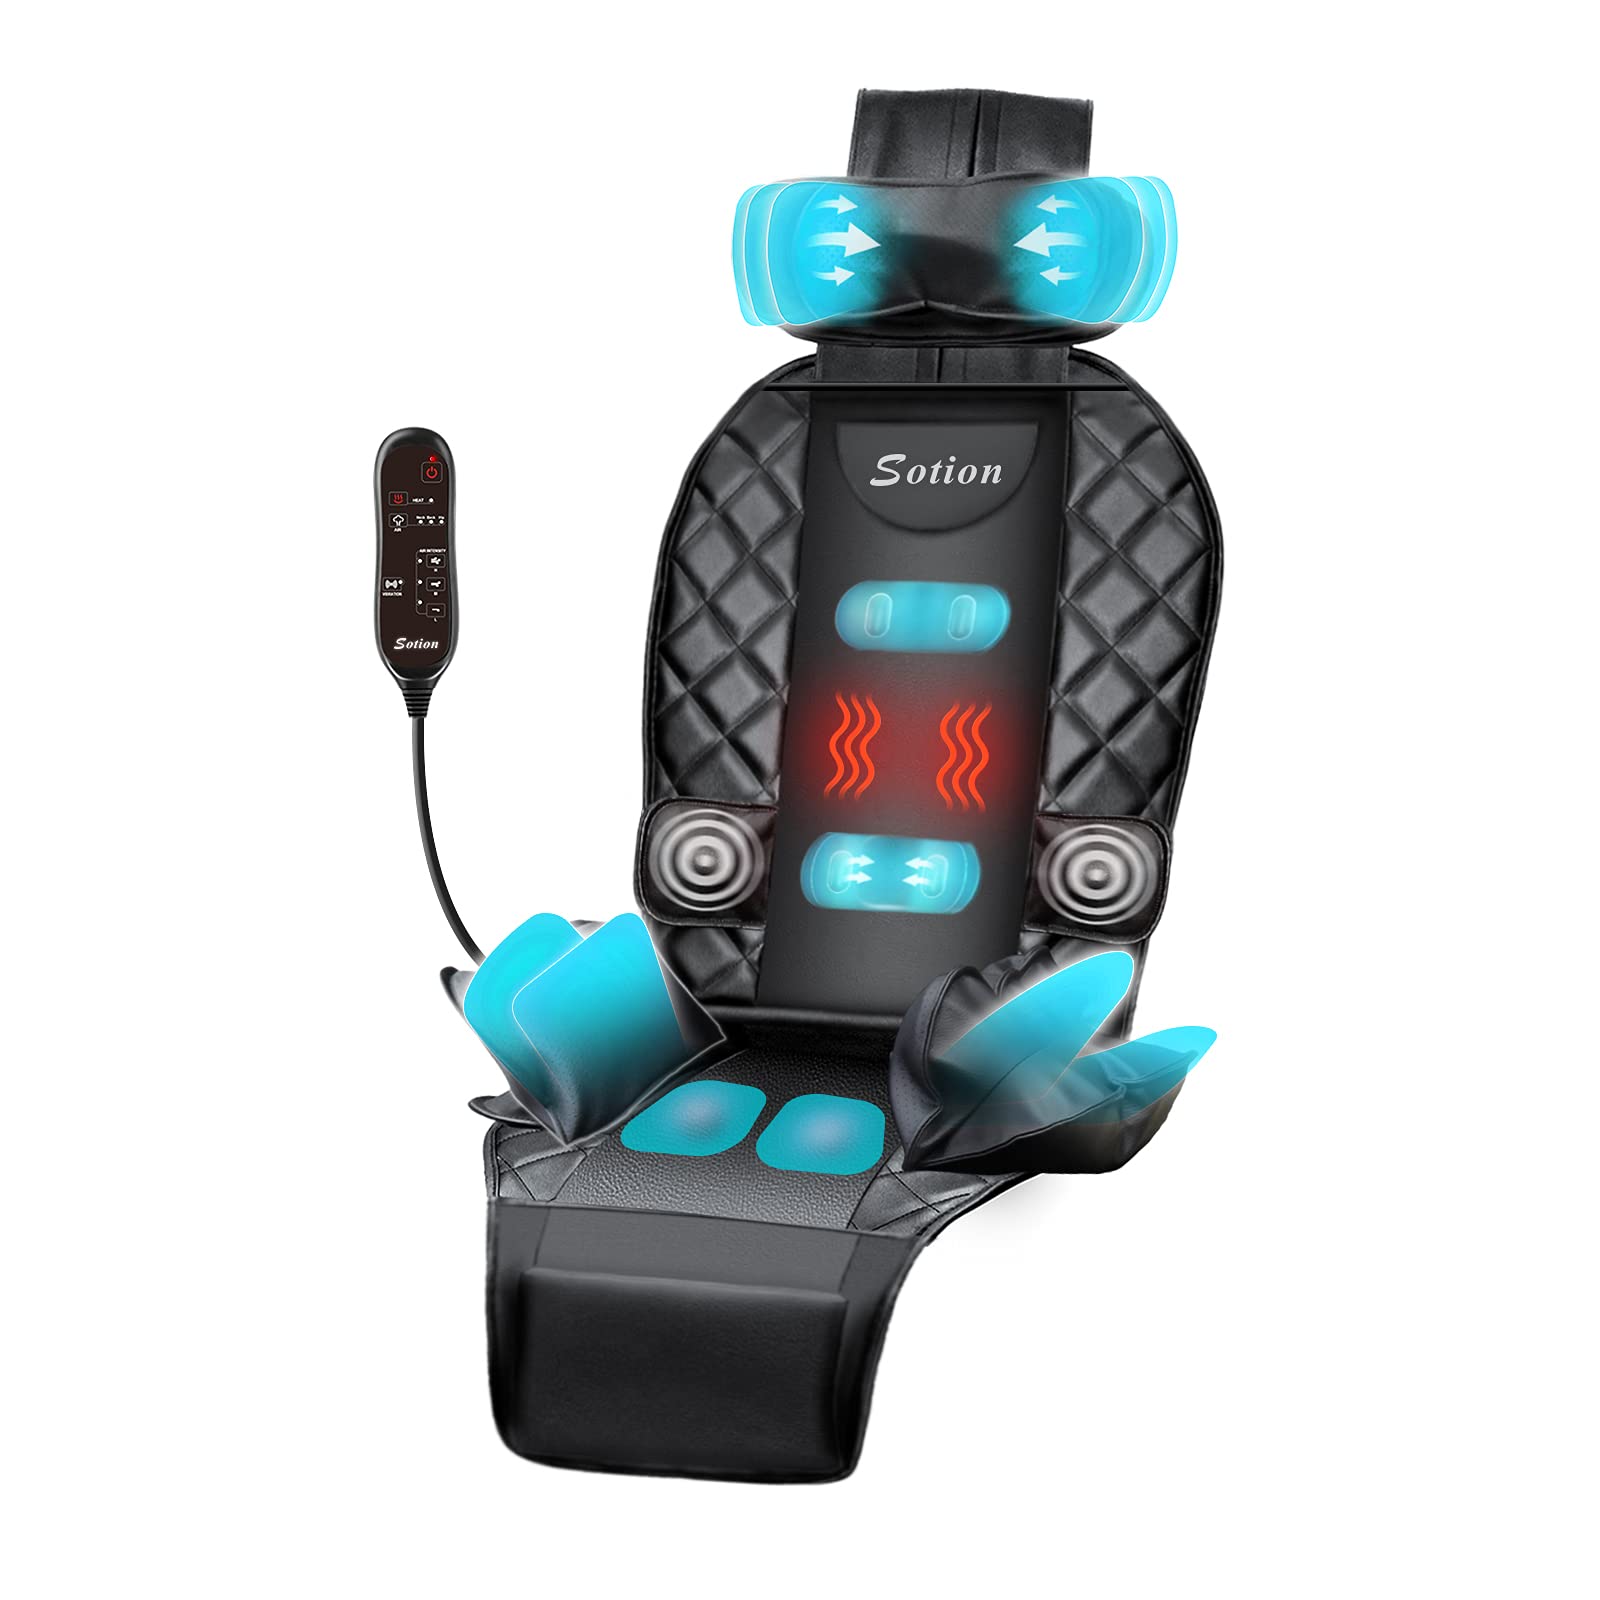 Sotion Back Massager with Compress & Heat, Vibrating Massage Chair Pad for Home or Use ,Height Adjustable Massage Seat Helps Relieve Stress and Fatigue for Neck, Back, Waist and Hips